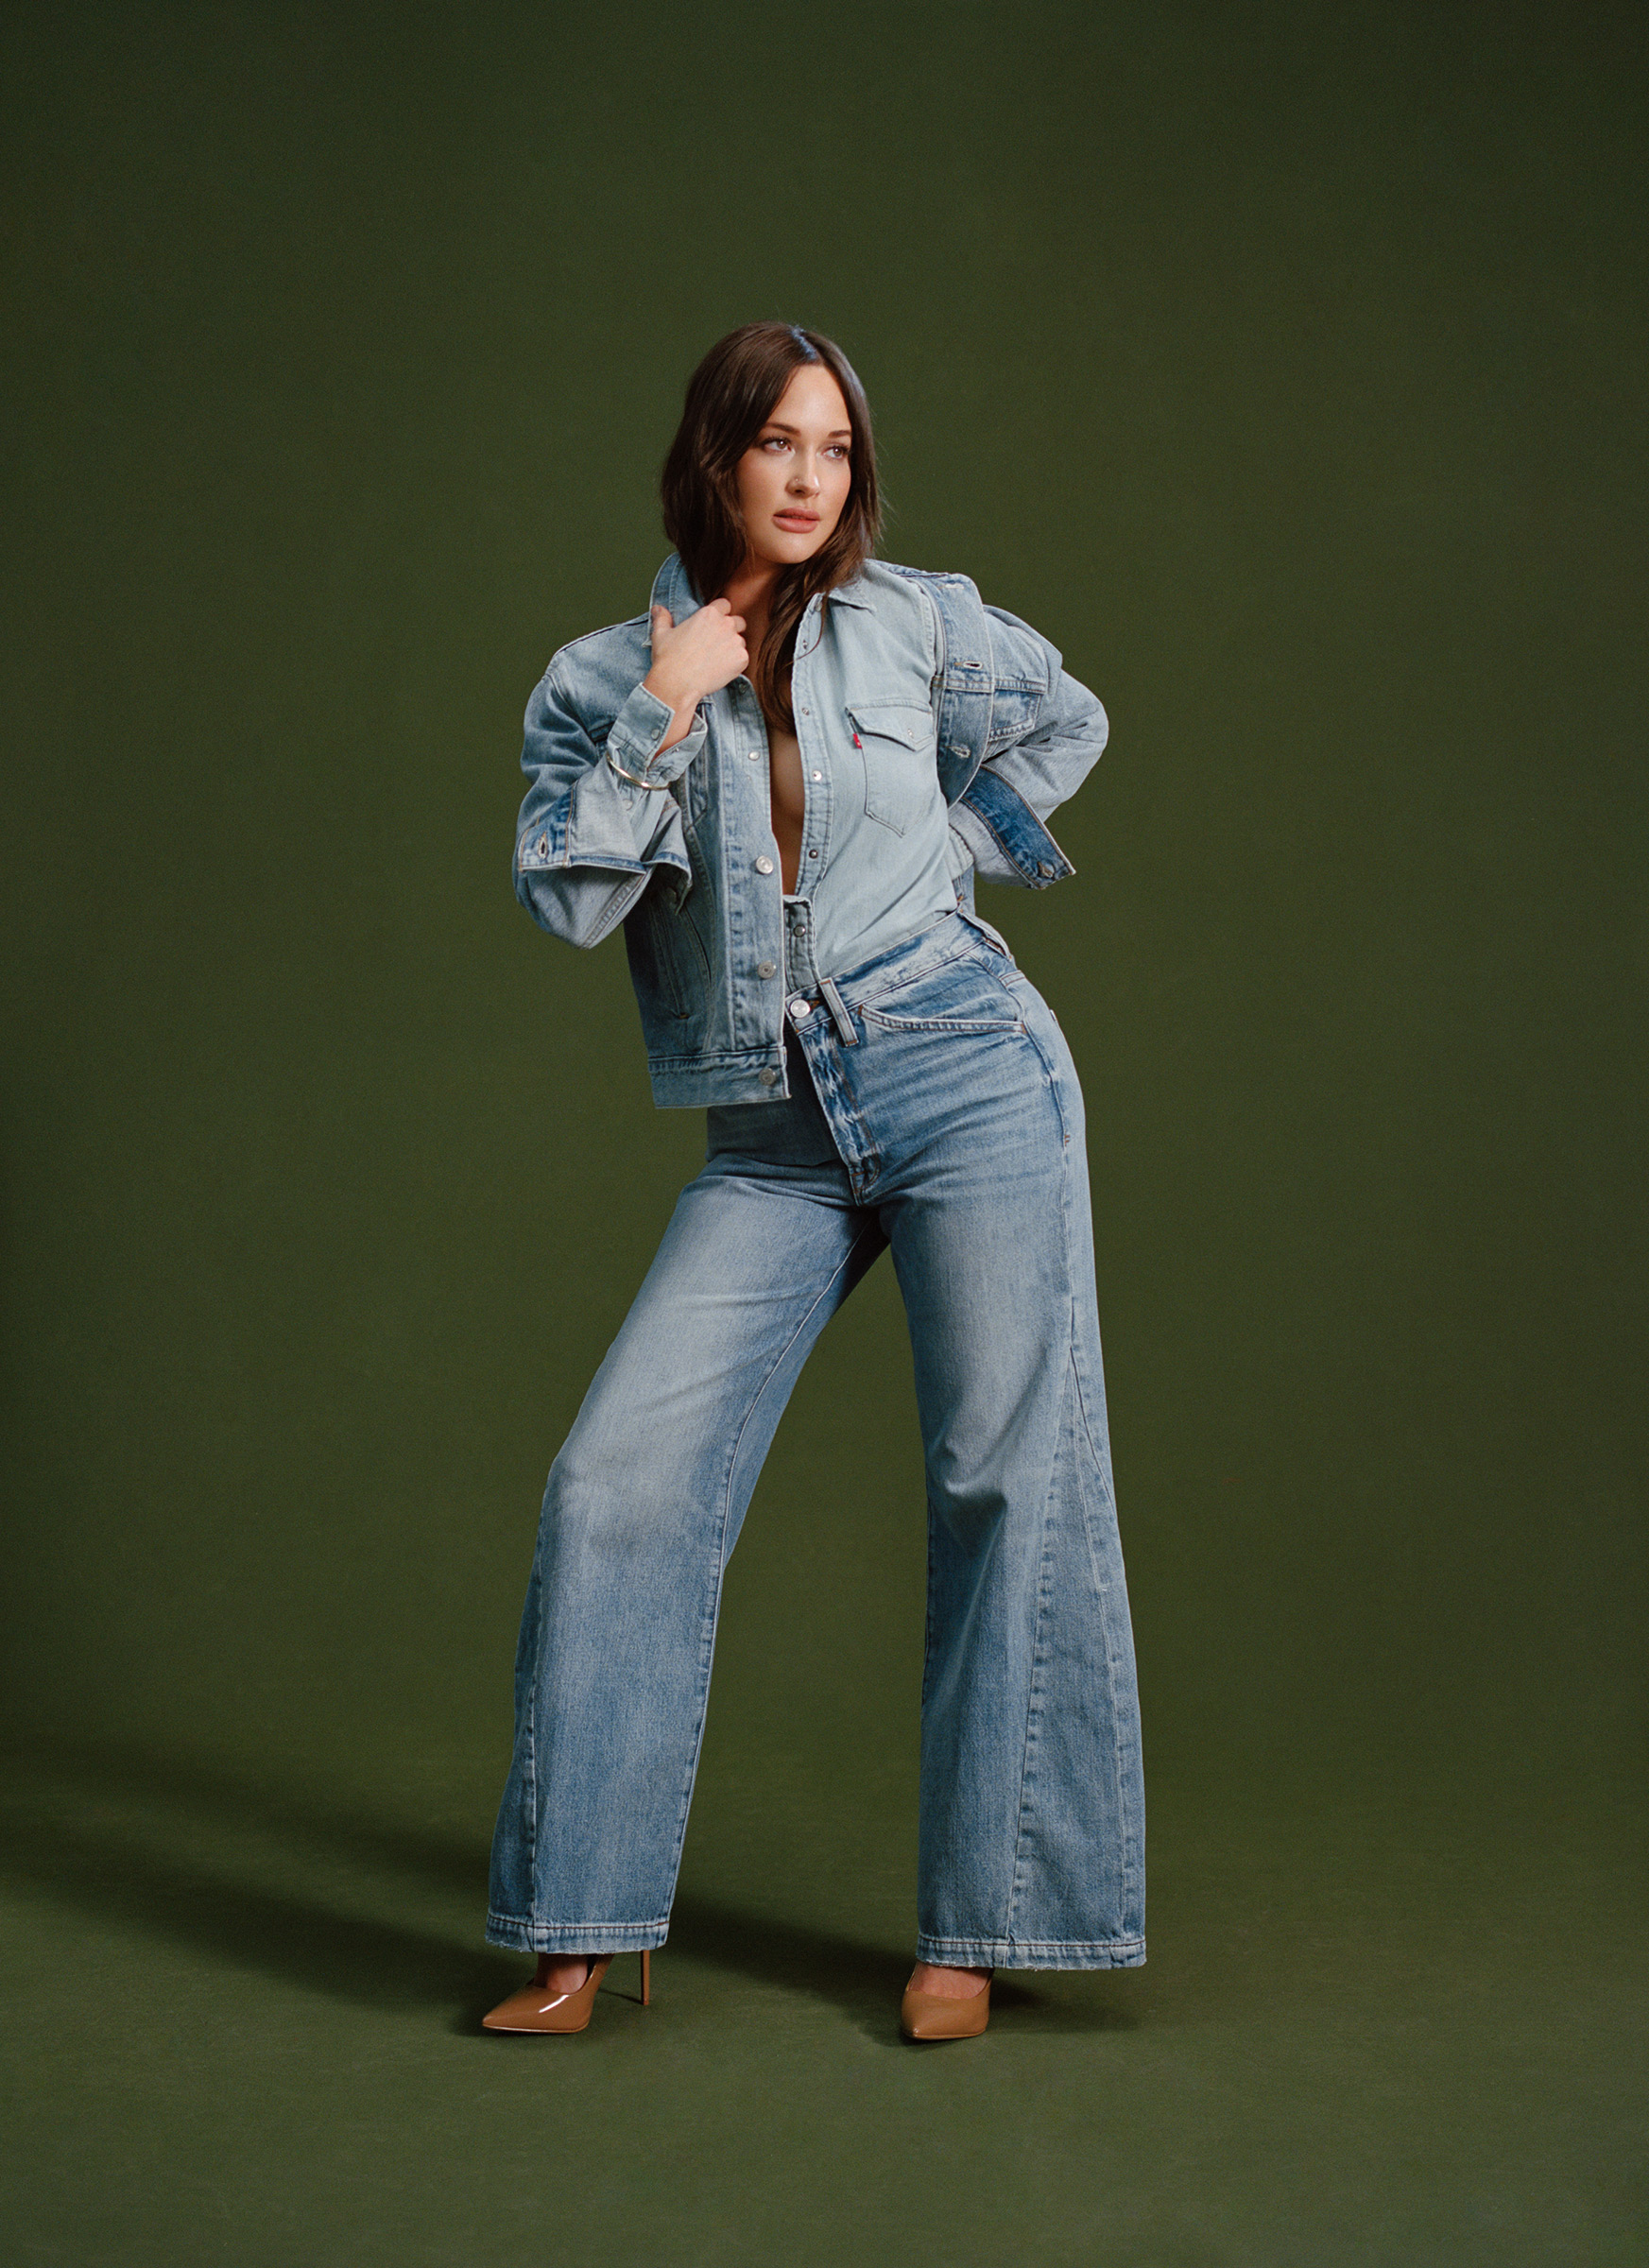 Kacey Musgraves in Los Angeles on Feb. 21, 2022. (Daria Kobayashi Ritch for TIME)